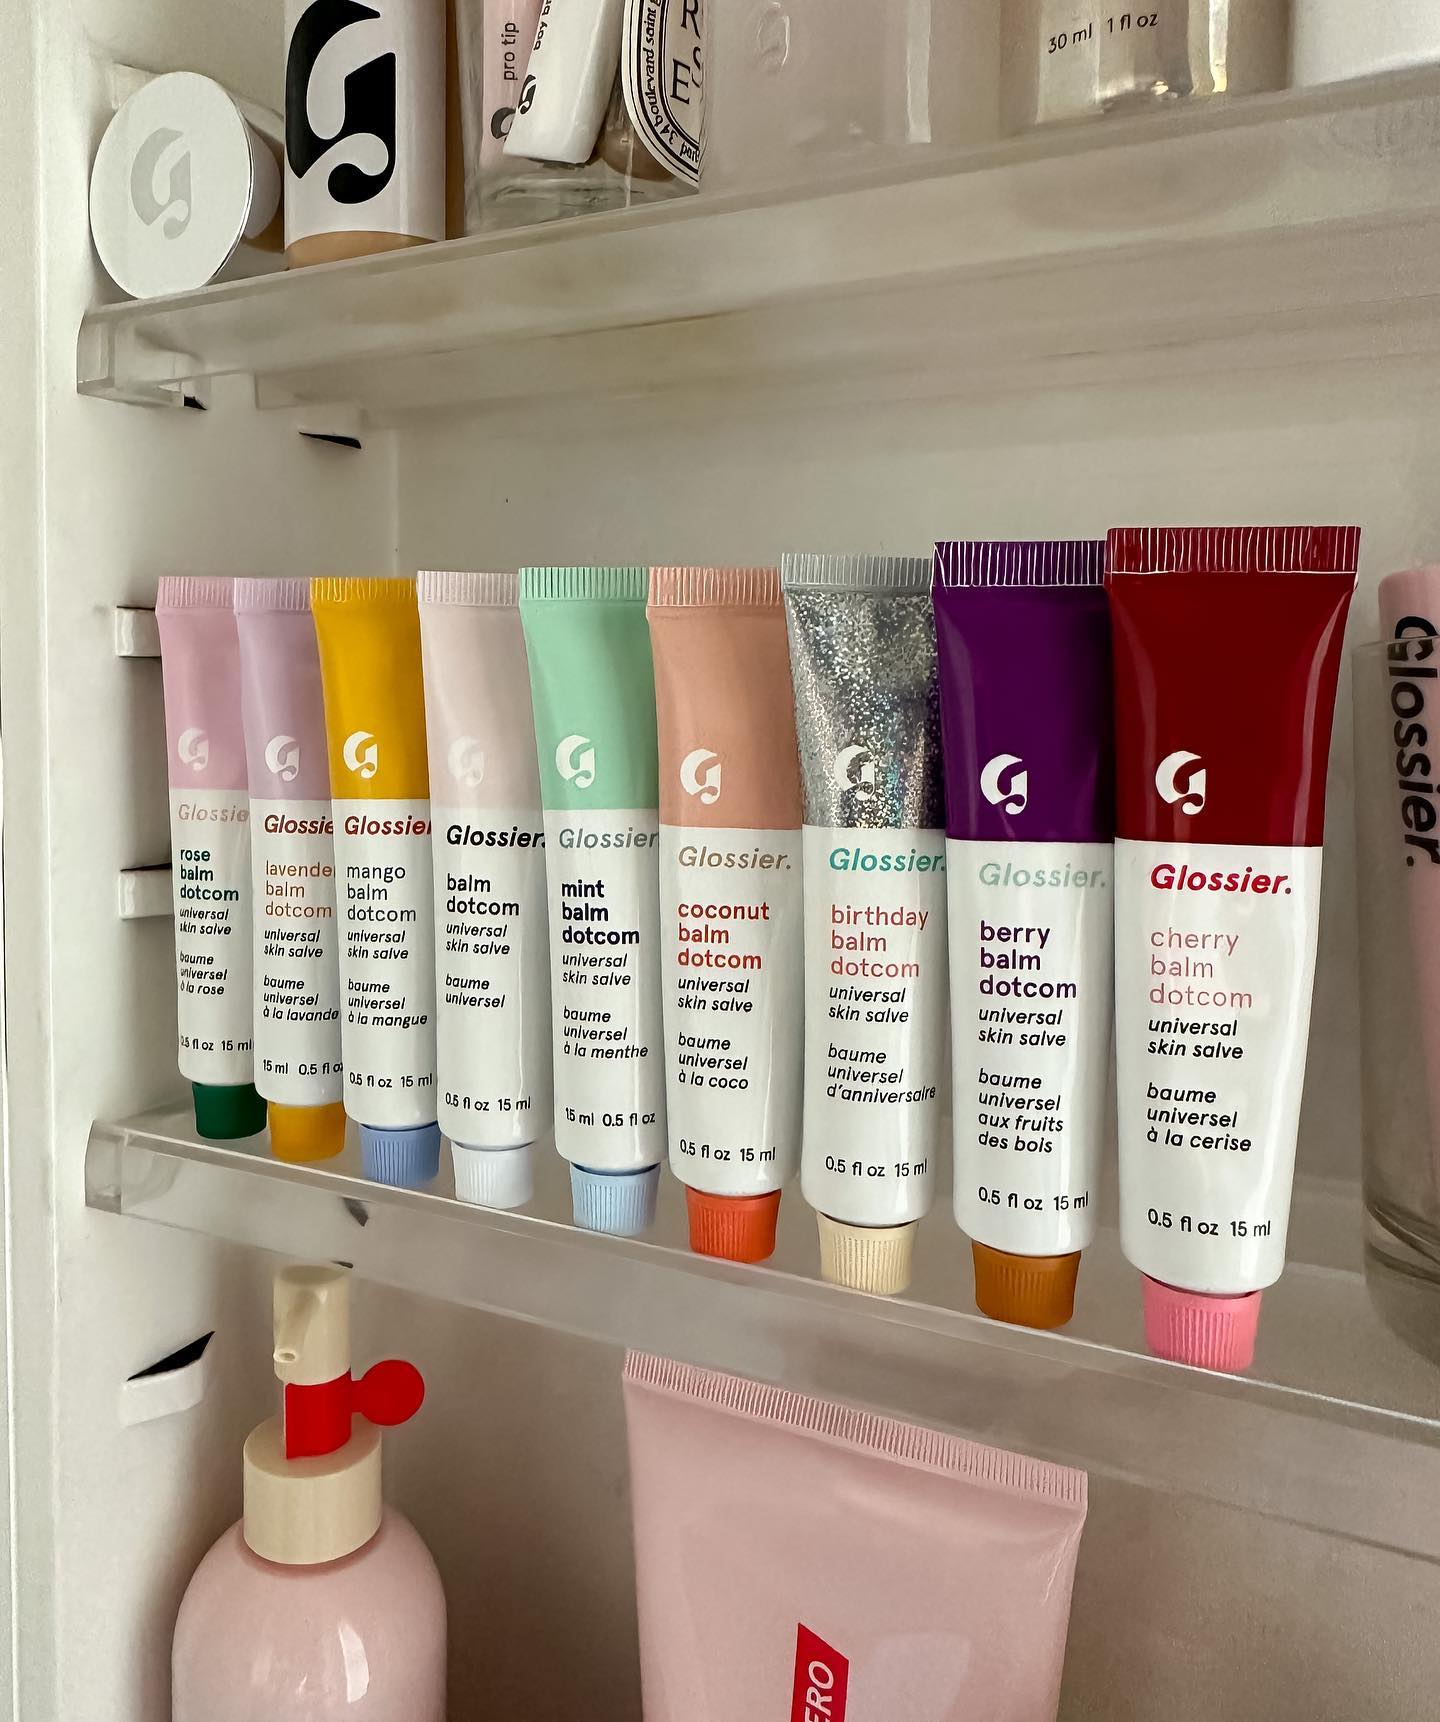 Various shades of Glossier's lipgloss are on display in a bathroom cabinet.